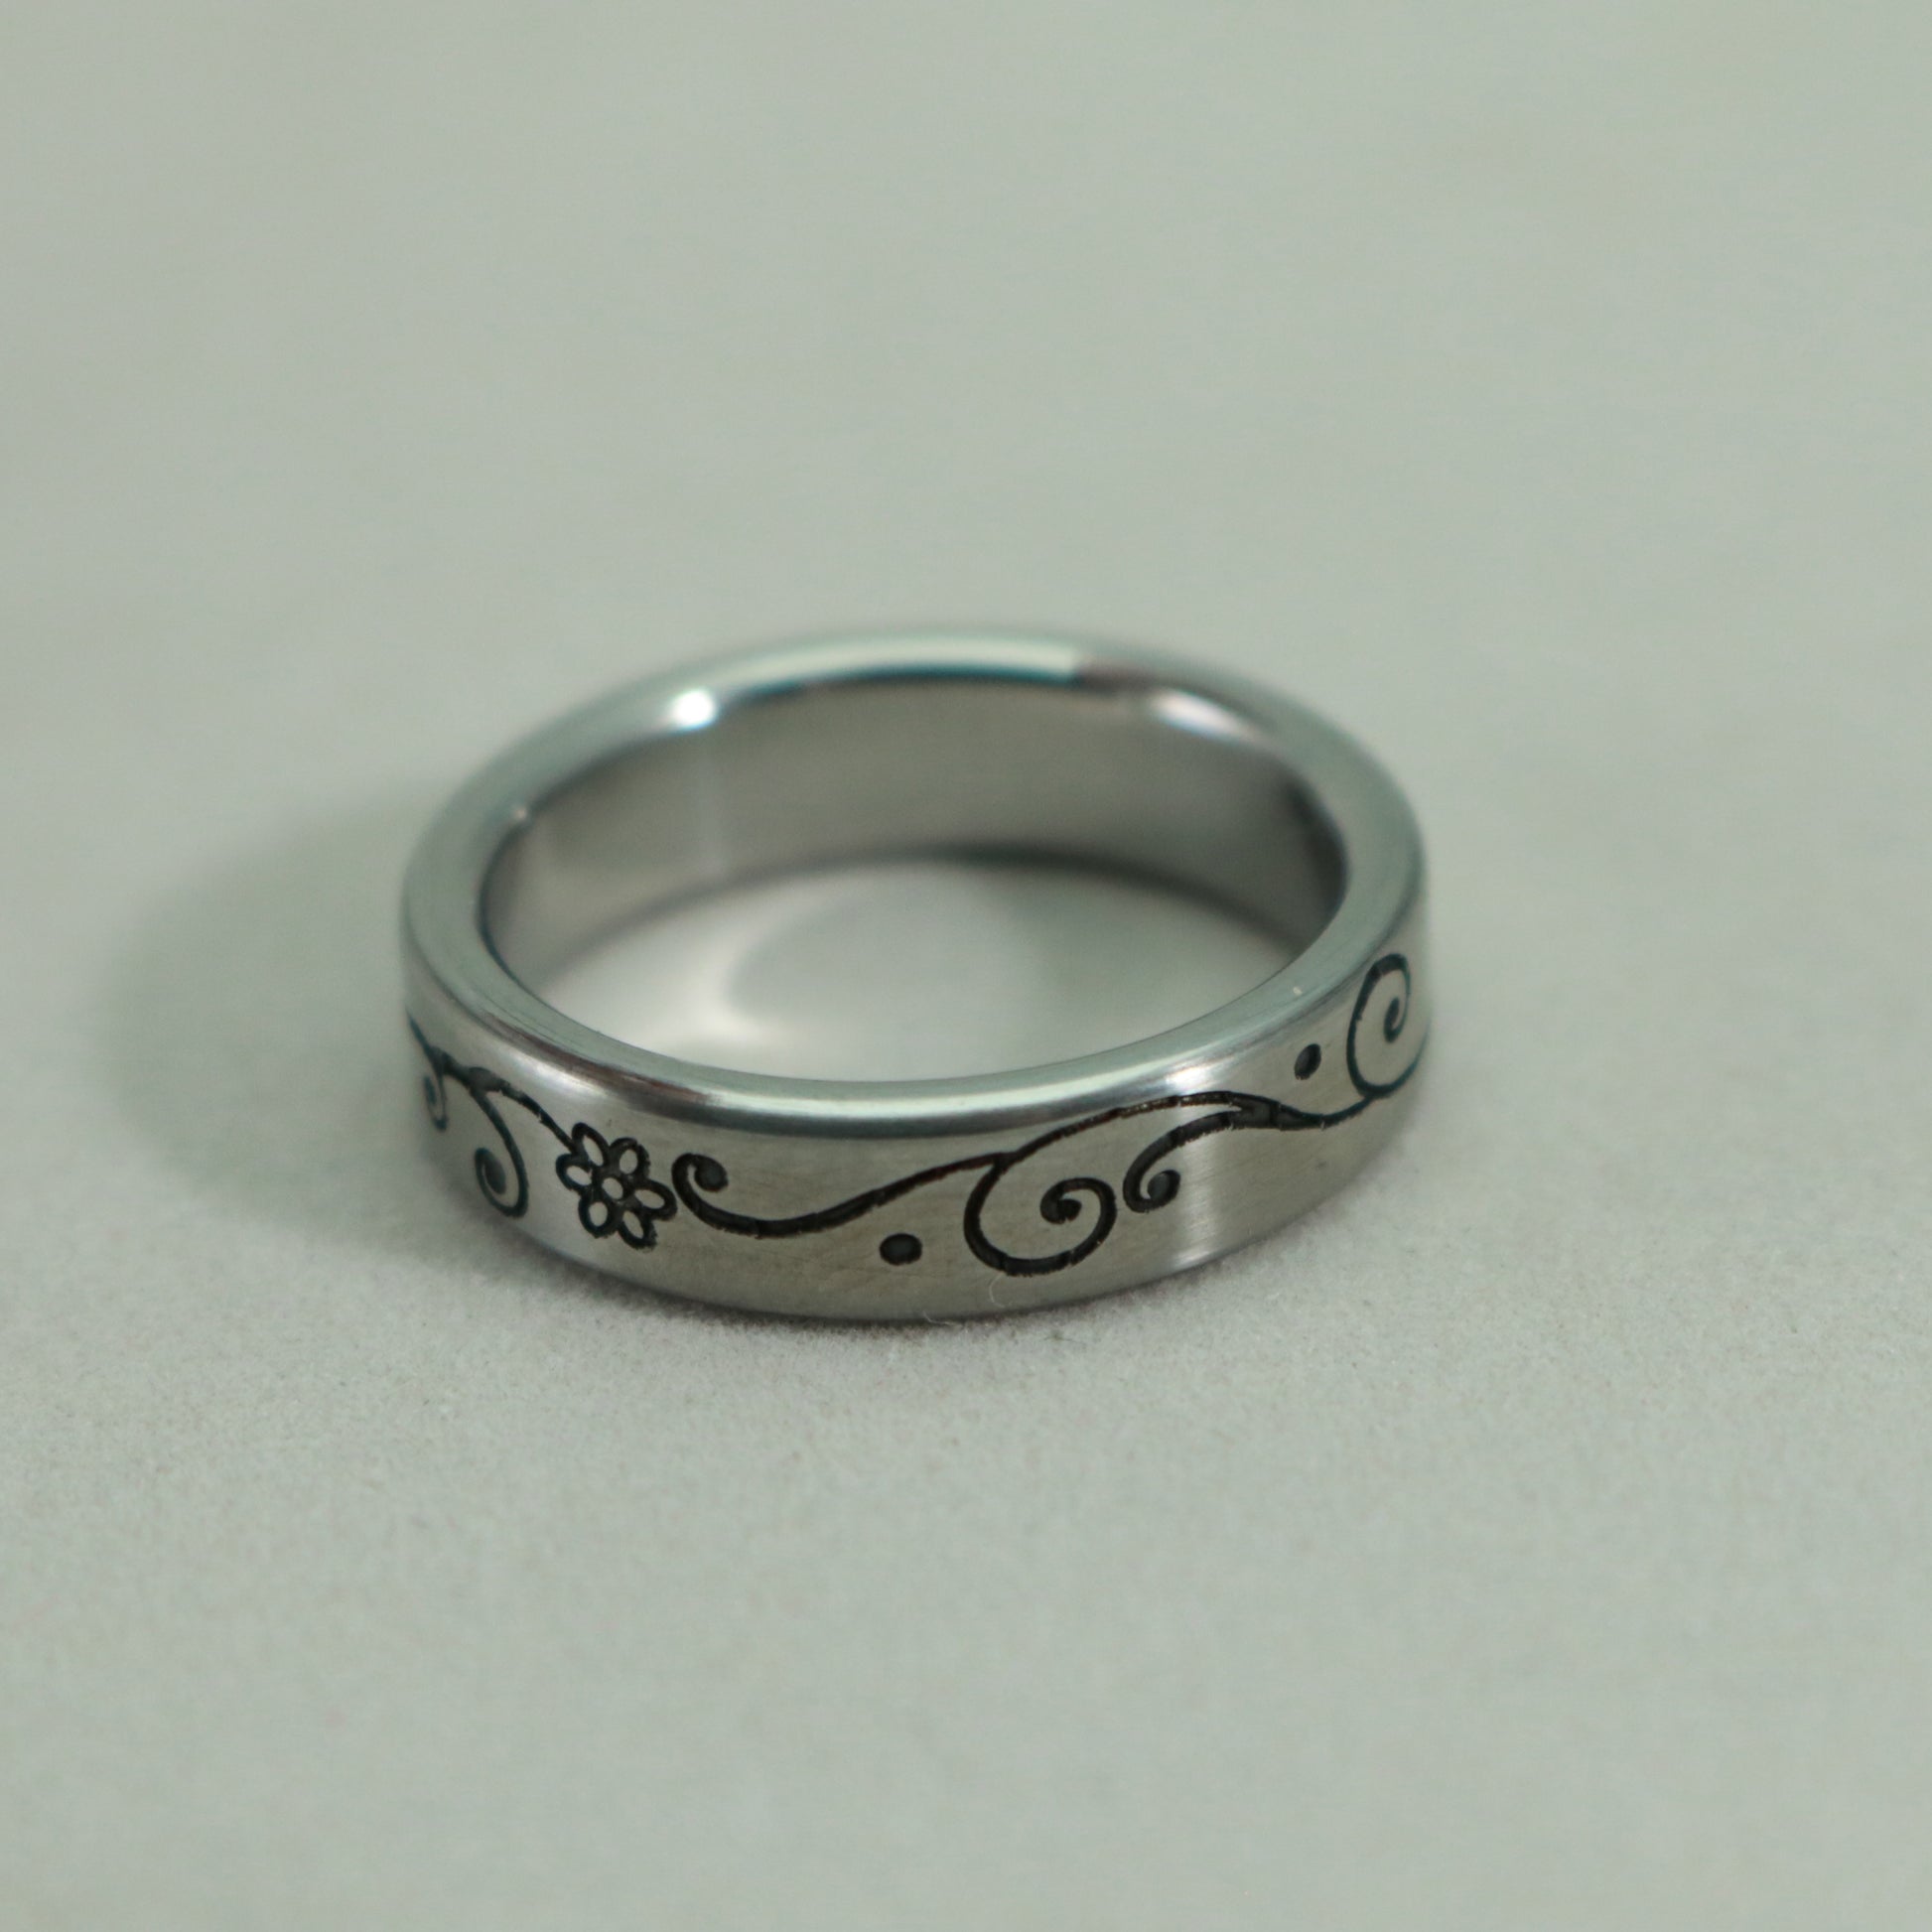 Ladies stainless steel ring in size 7 1/4 engraved with a beautiful floral pattern